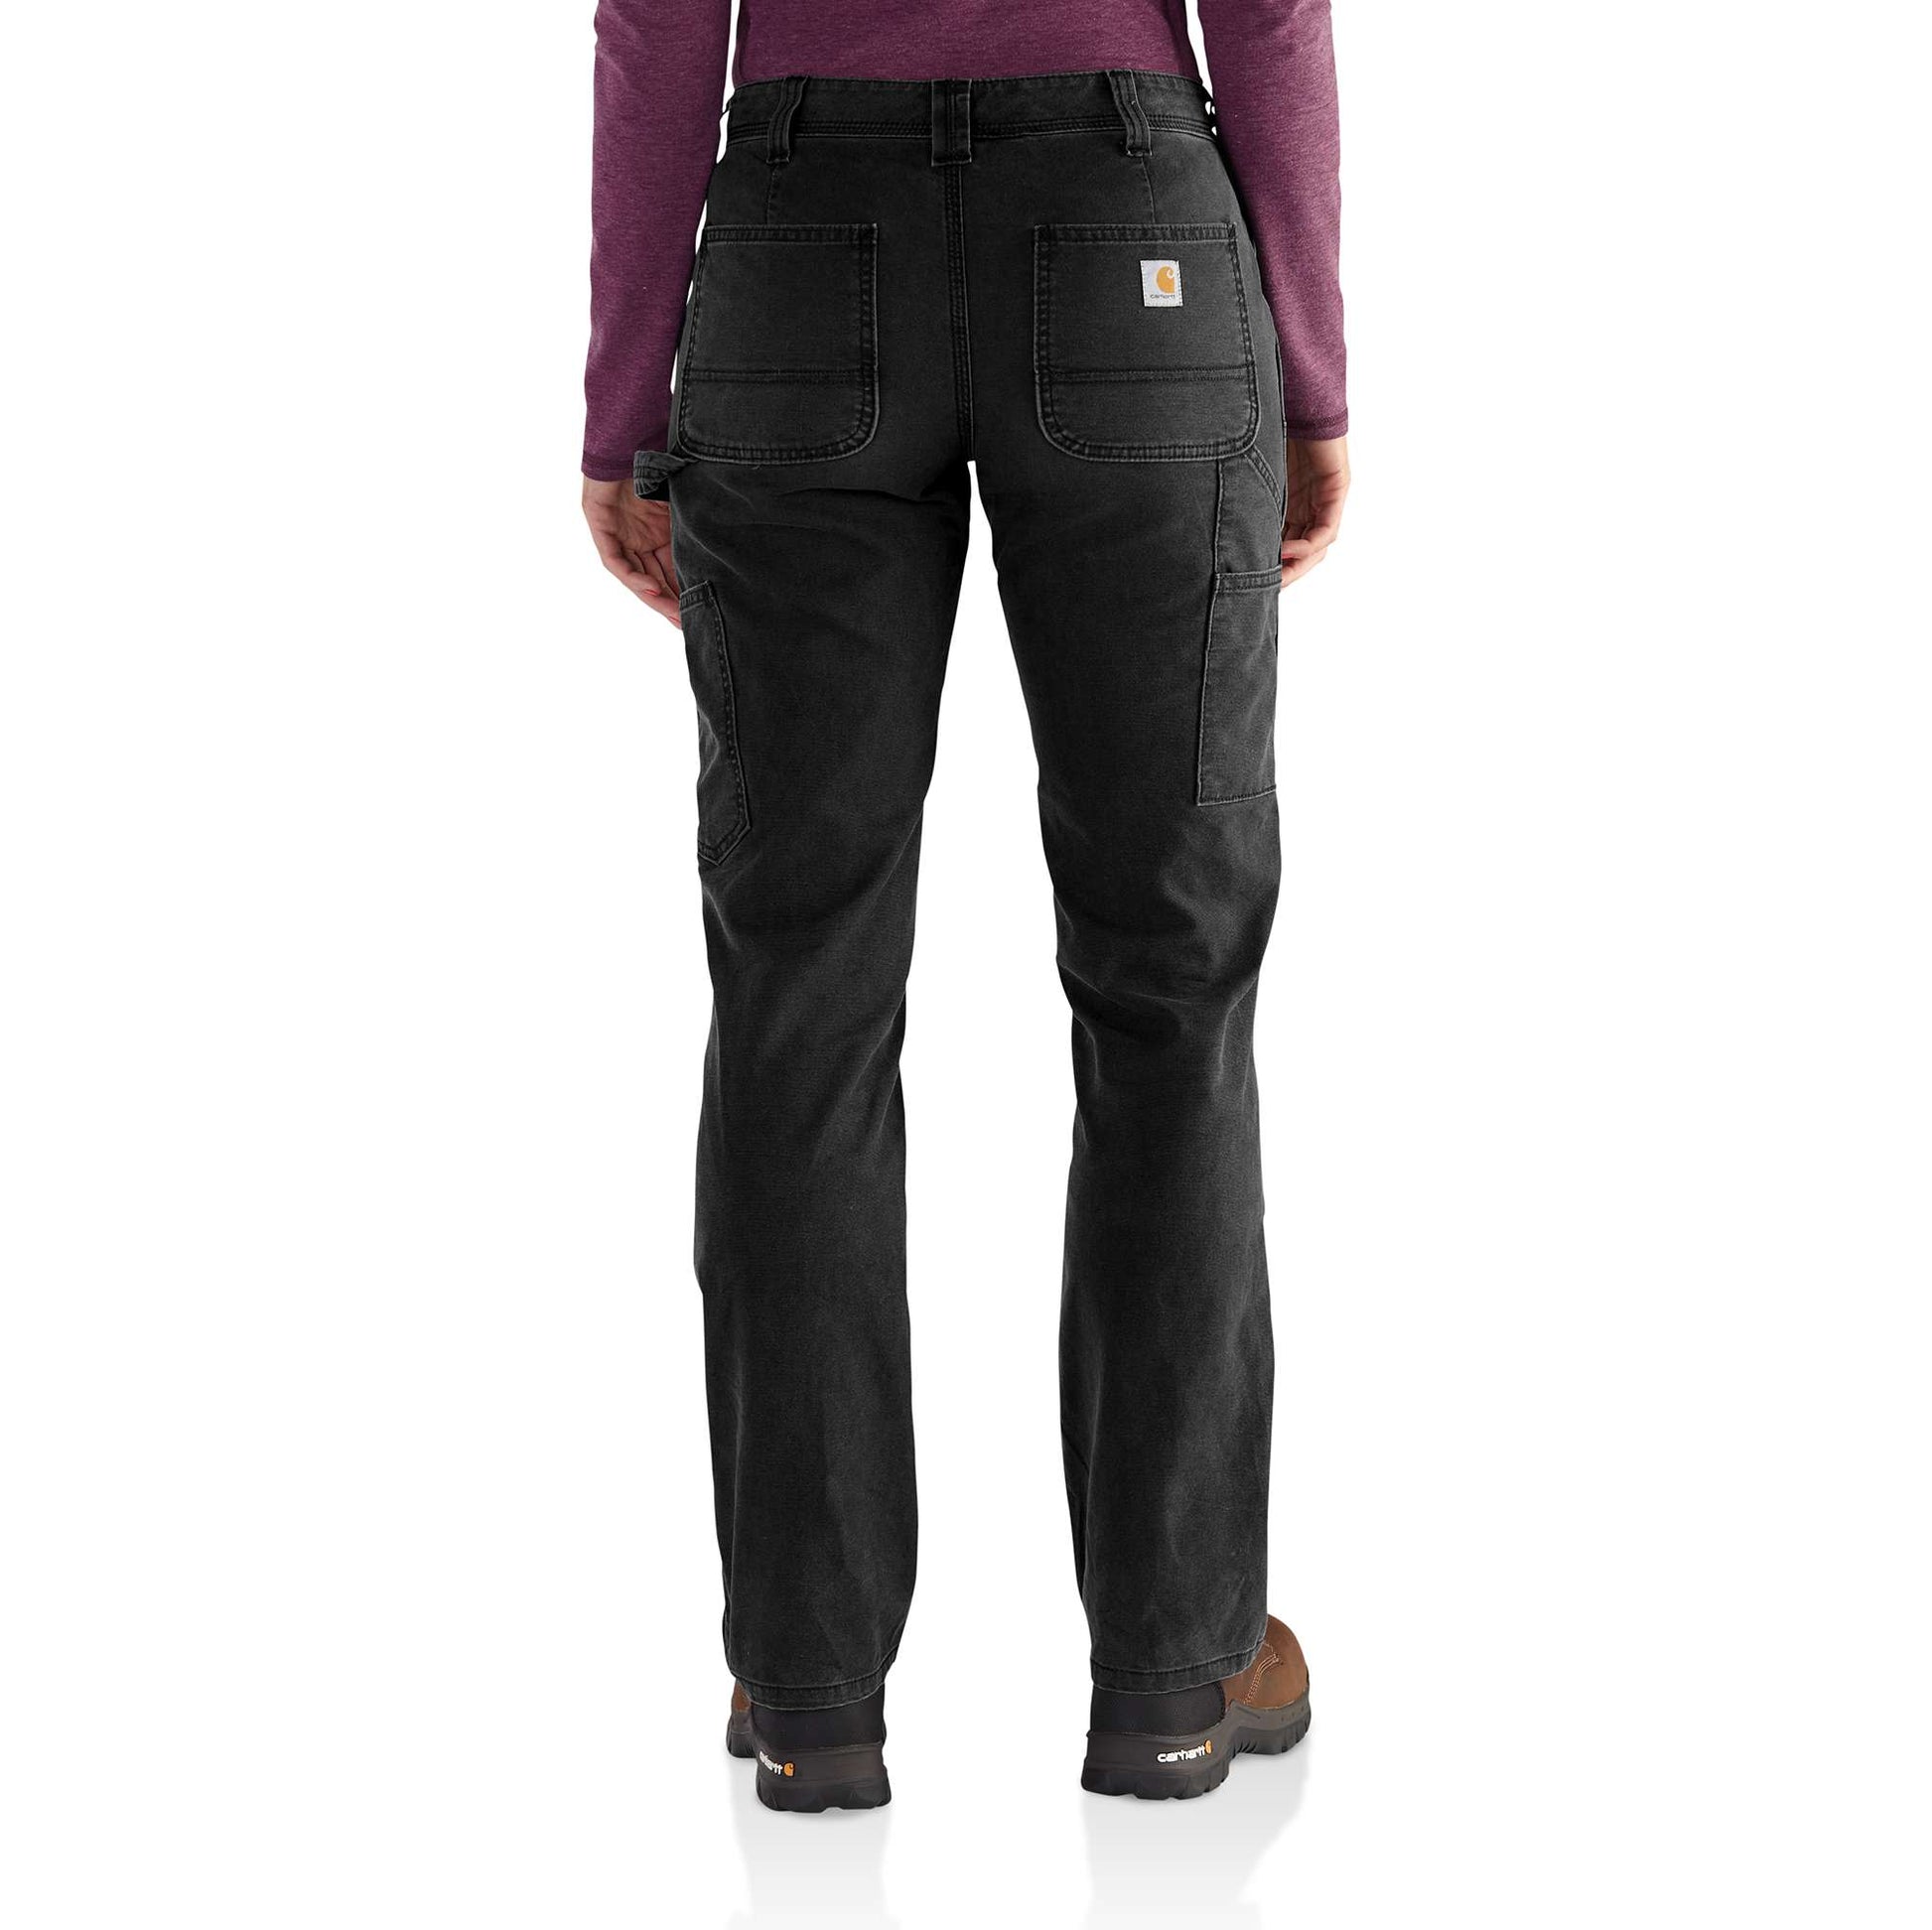 Carhartt Women's Straight Fit Double Front Jean, Rainwash, 8 at